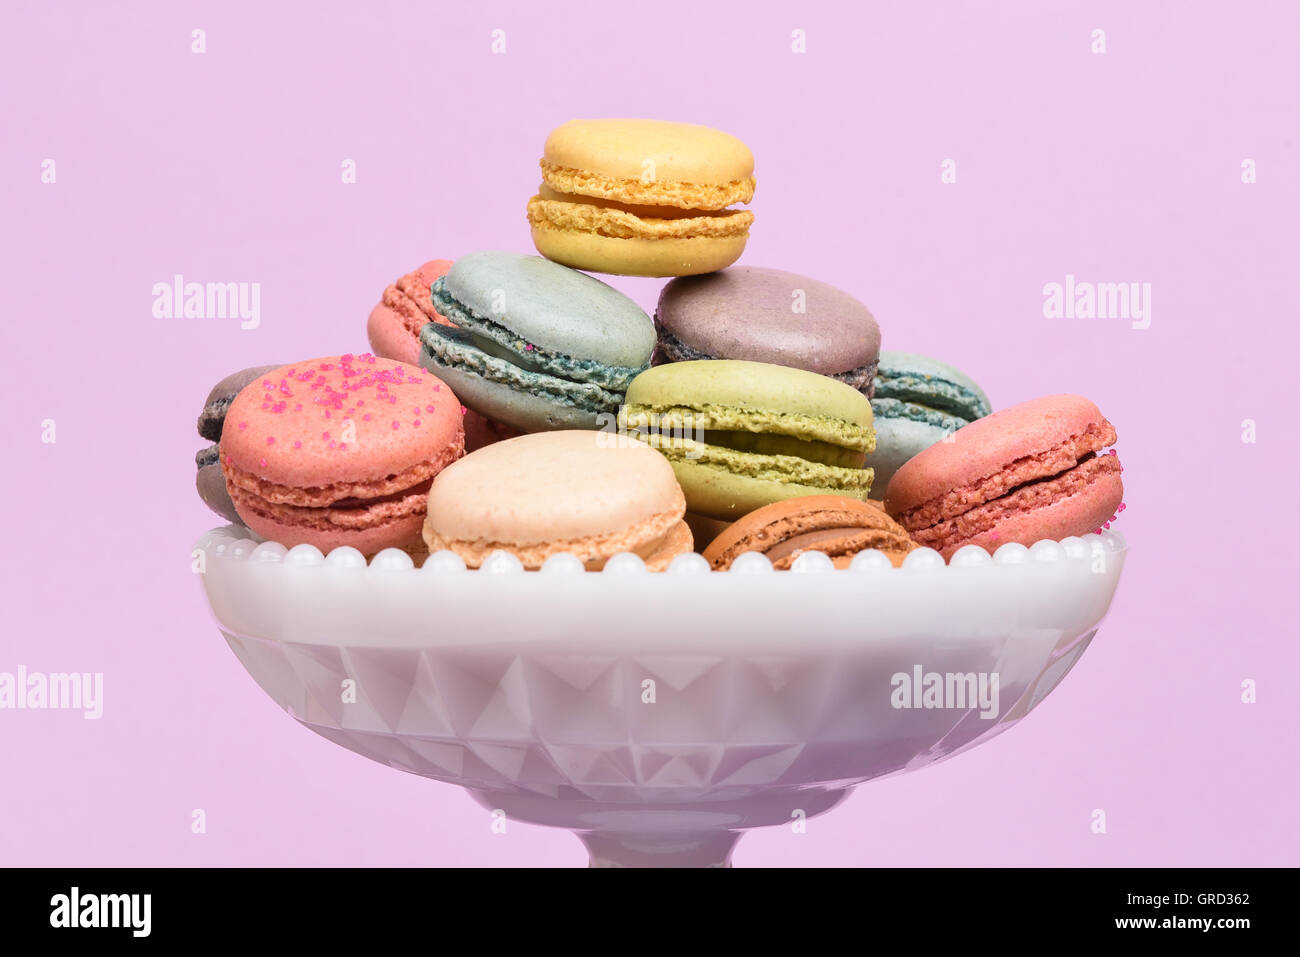 Macarons piled in a white pedestal dish Stock Photo